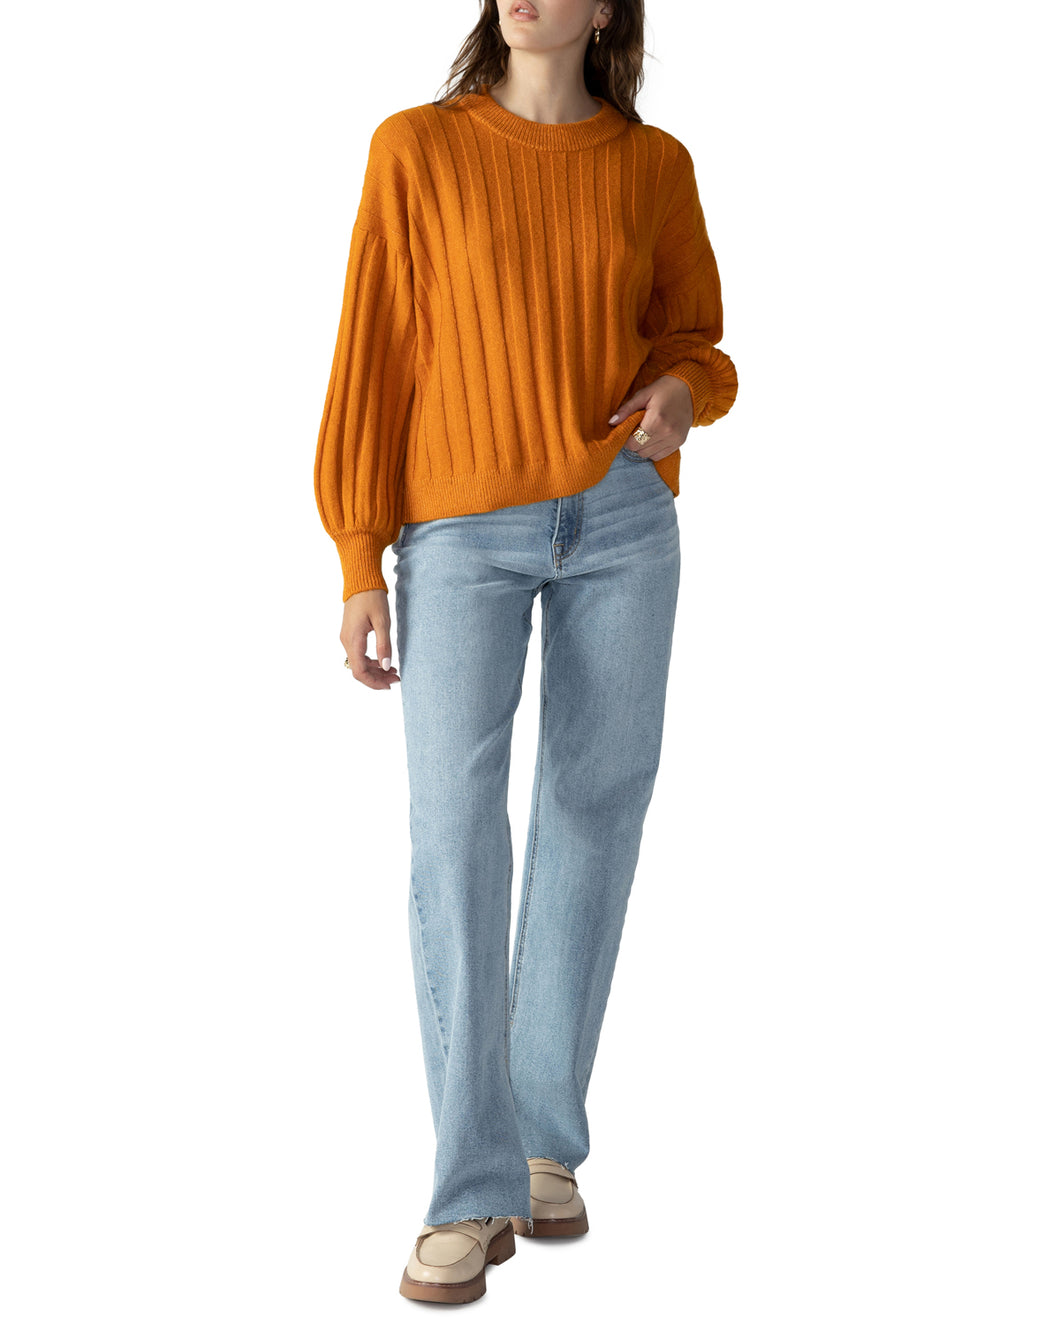 Cozy Ribbed Sweater in Pumpkin